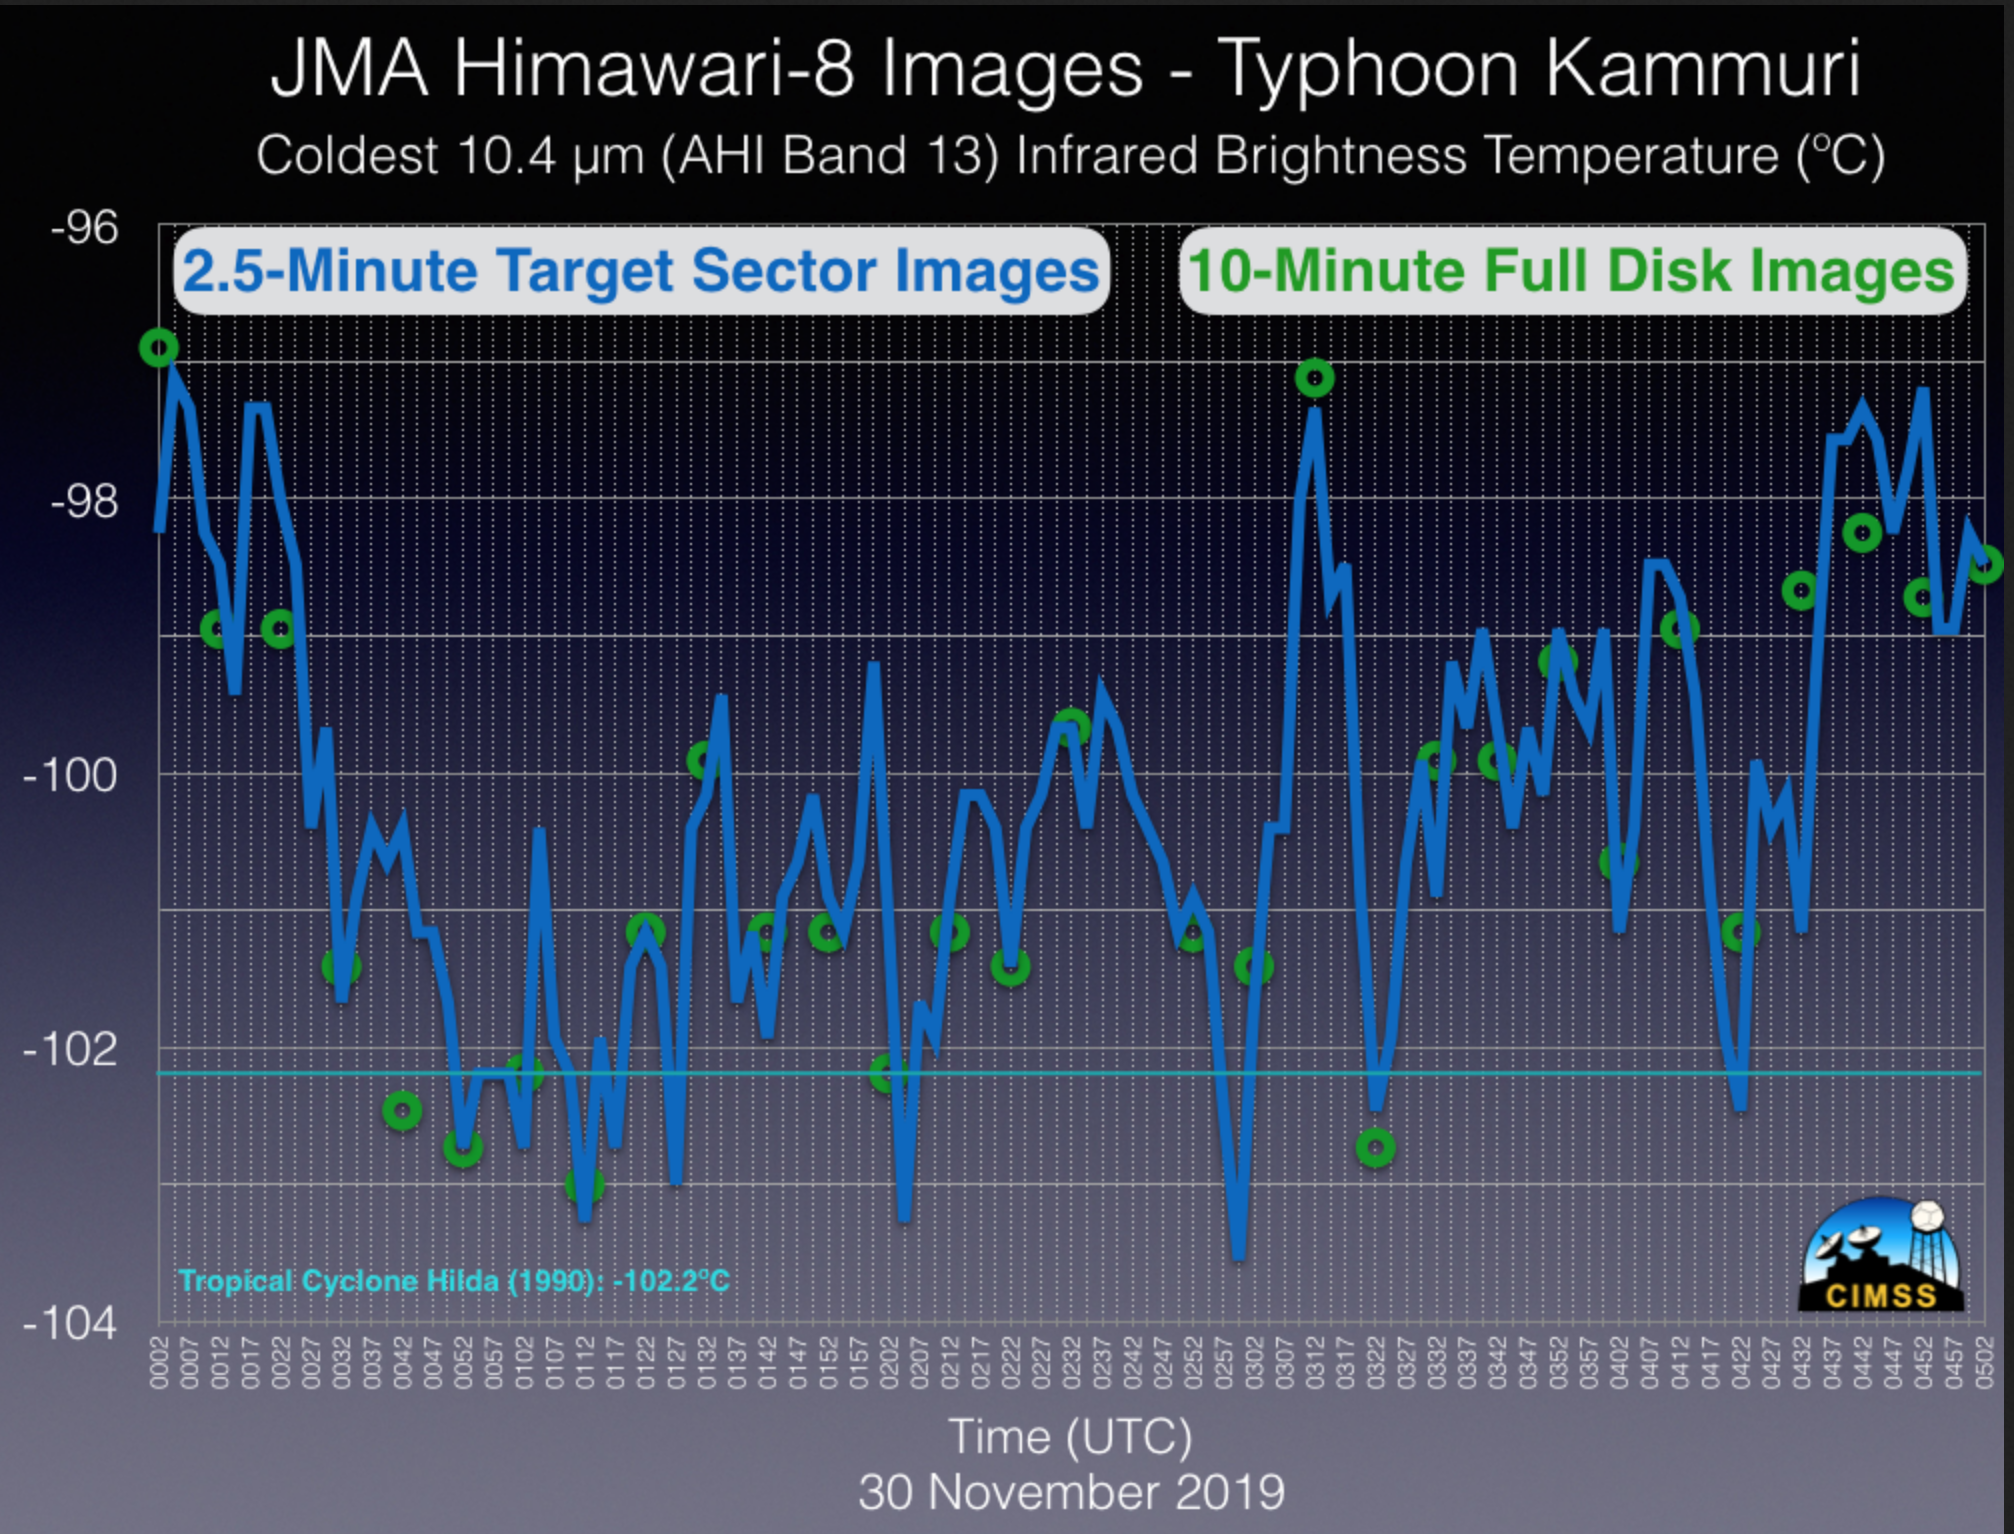 Plots of coldest Himawari-8 10.4 µm brightness temperatures on 2.5-minute Target Sector (blue) and 10-minute Full Disk (green) images [click to enlarge]